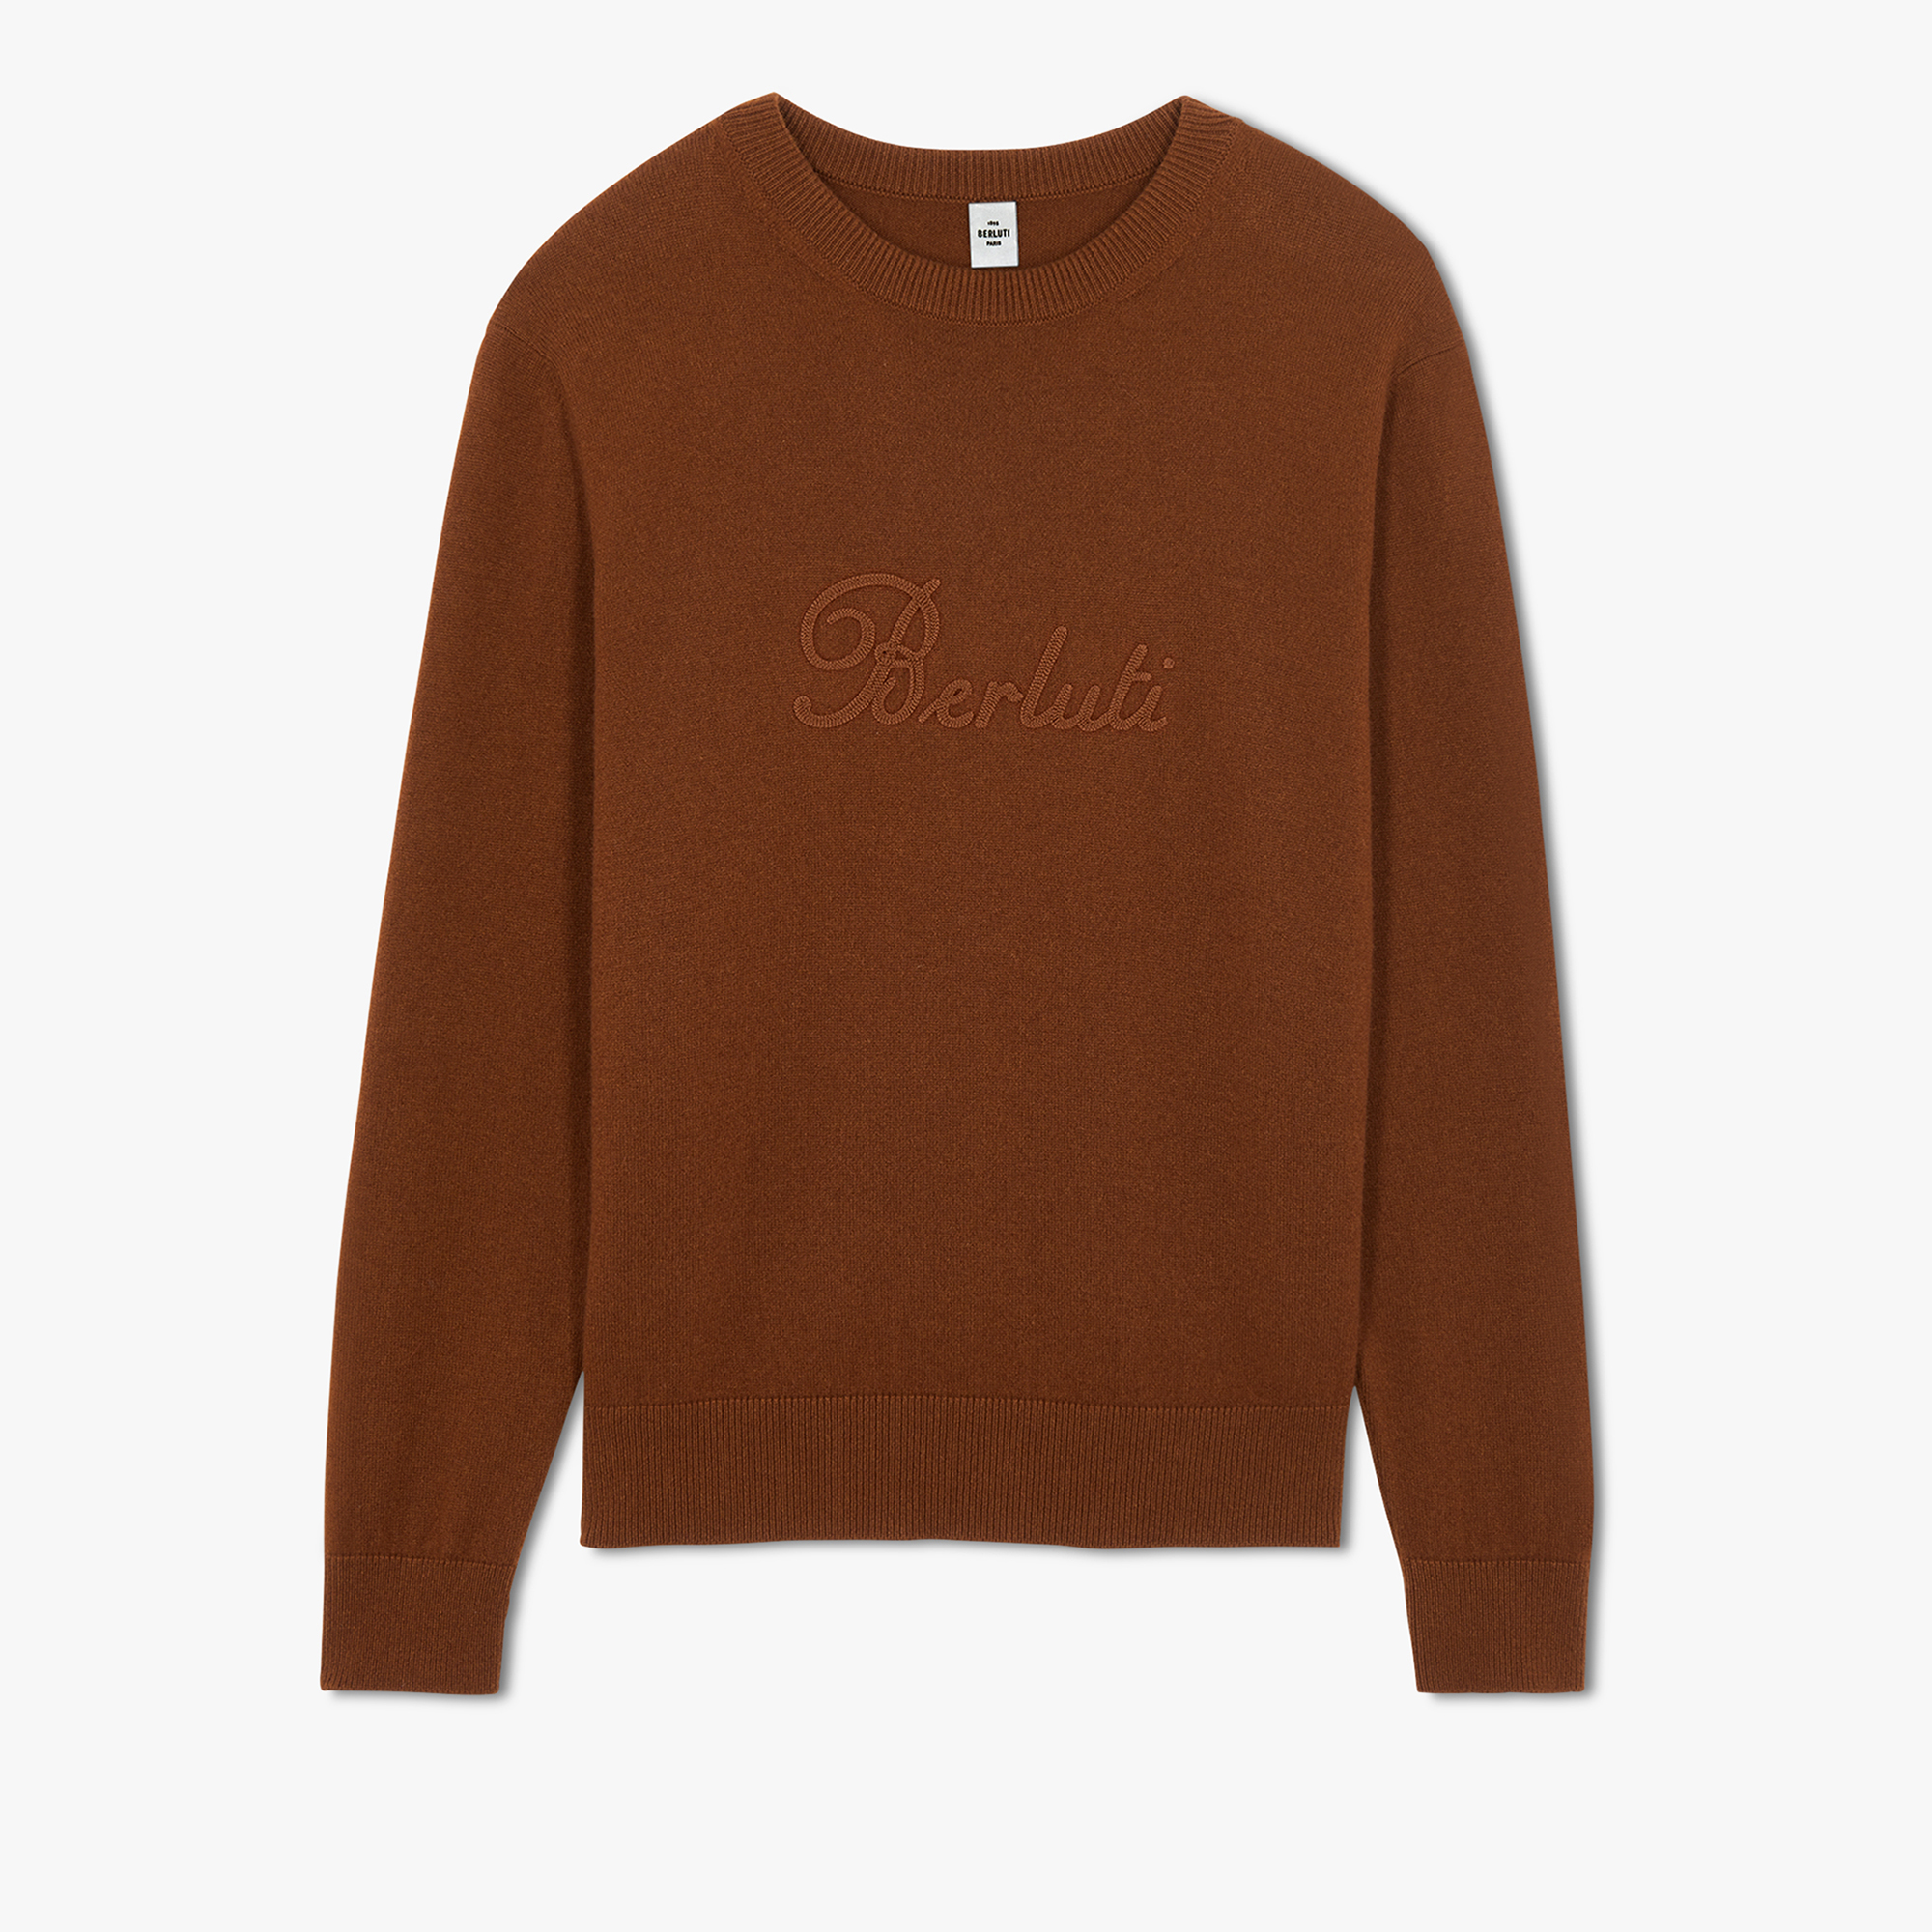 Cashmere Sweater With Thabor Embroidery, TOFFEE CAMEL, hi-res